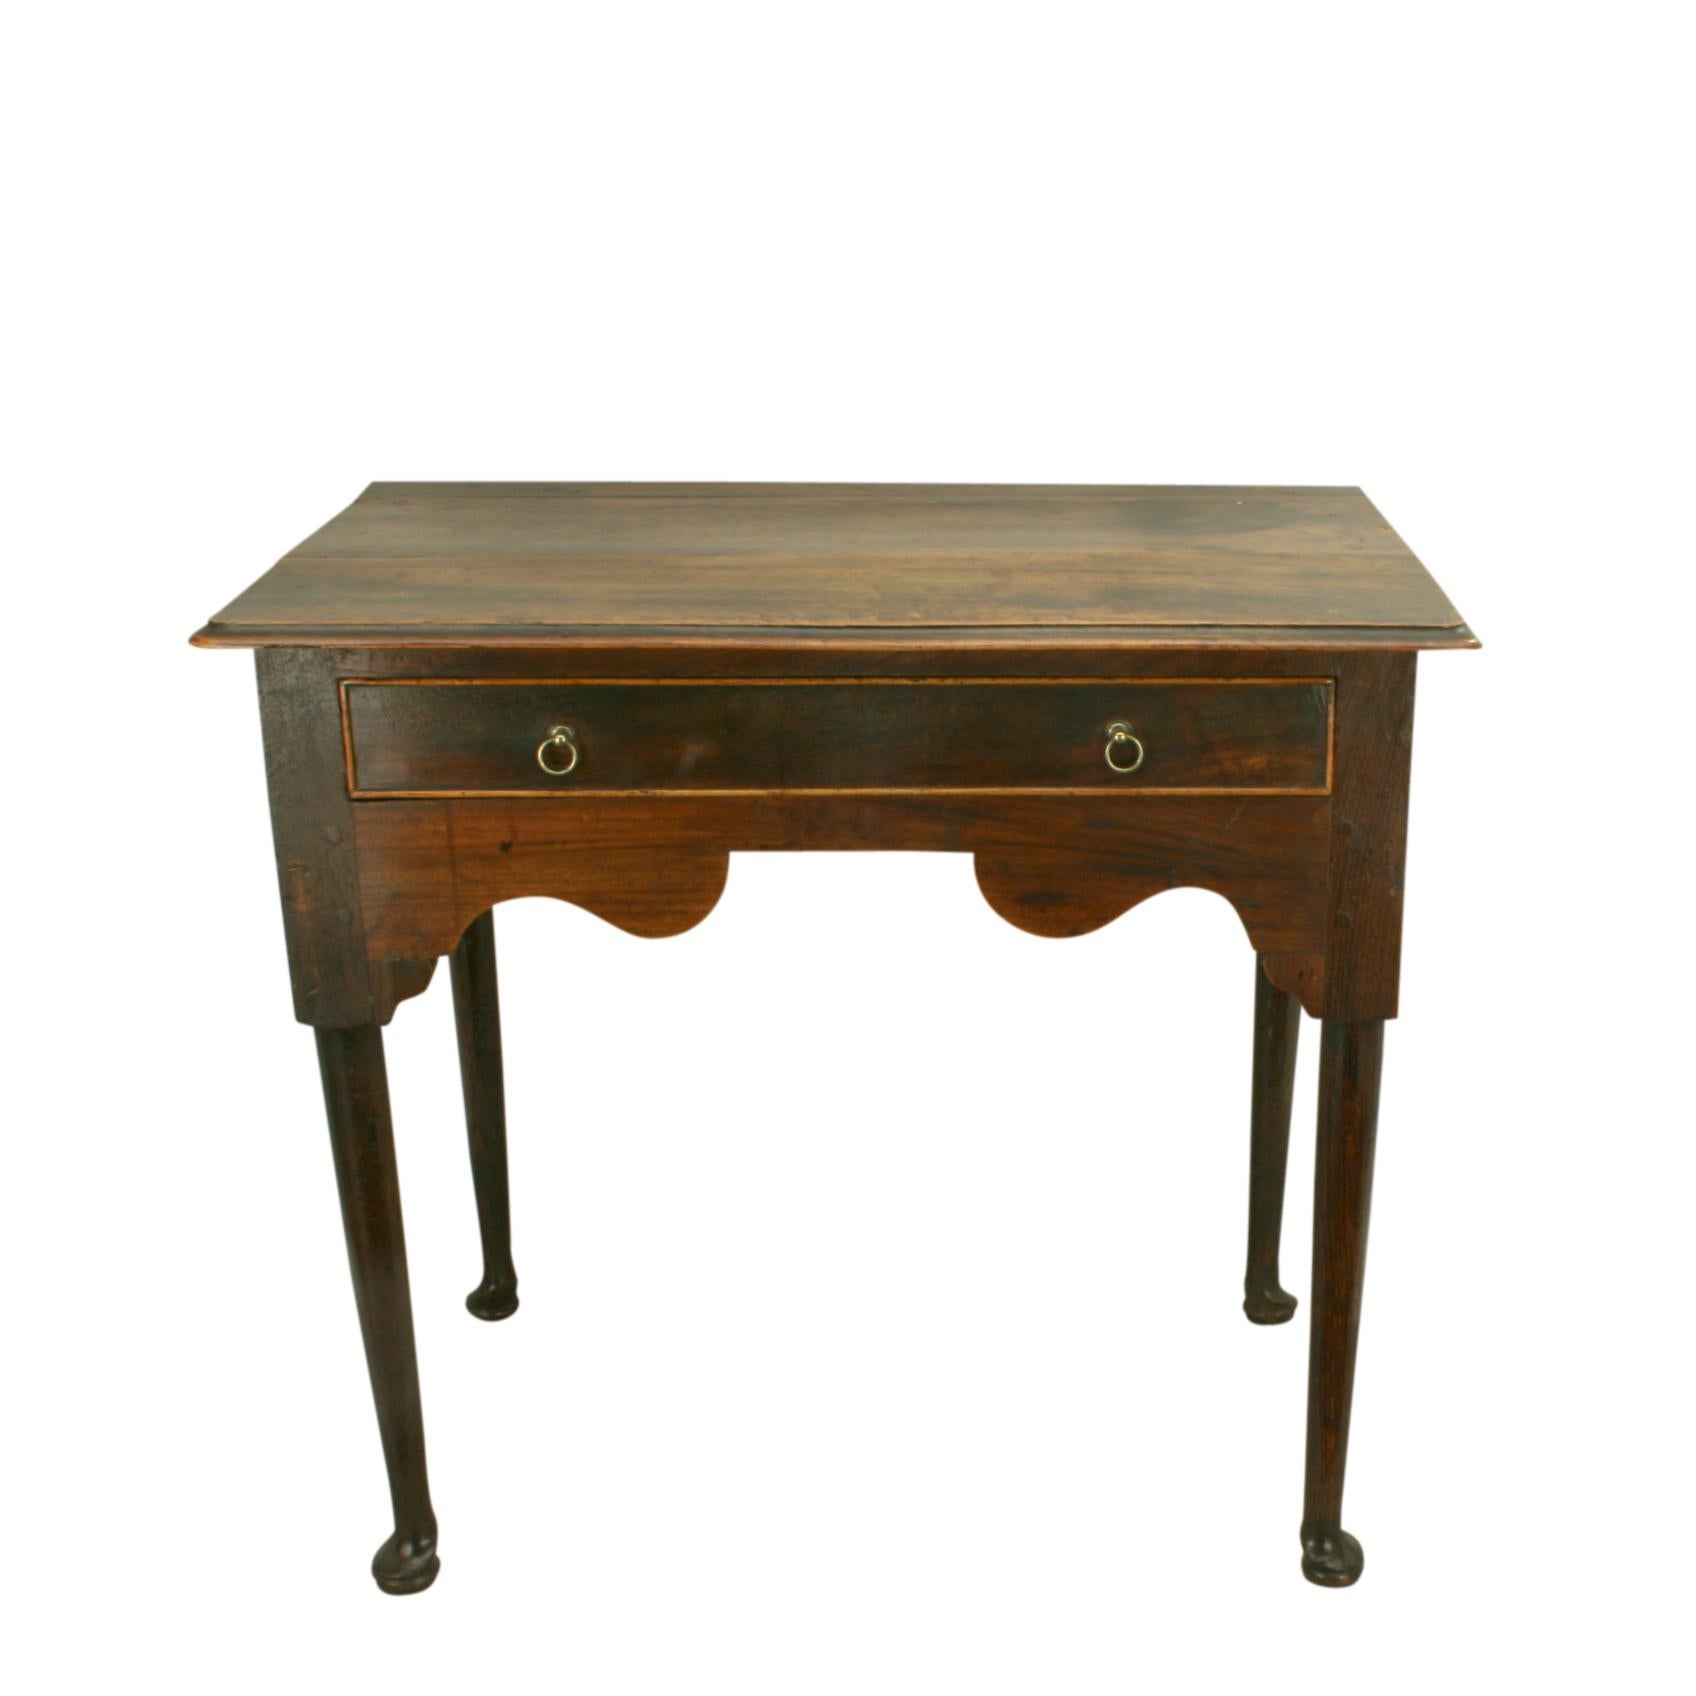 Elm low boy.
A good quality elm lowboy, side table. The rectangular top with round corners and edged moulding. One central drawer with cockbeading and two brass drop ring handles. The side table with shaped wavy apron and four turned legs